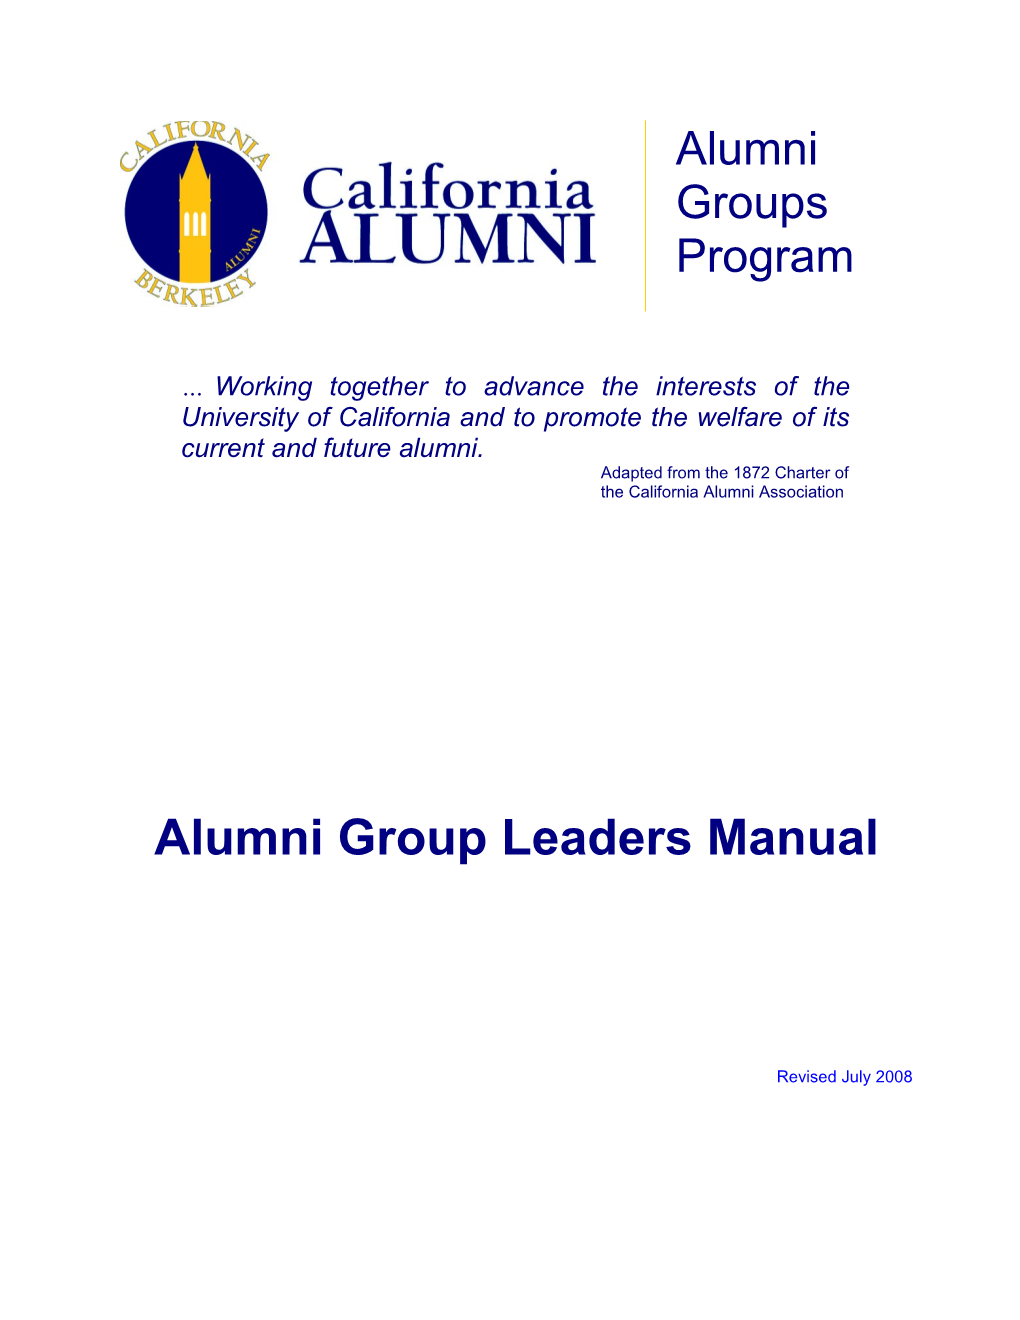 Adapted from the 1872 Charter of the California Alumni Association